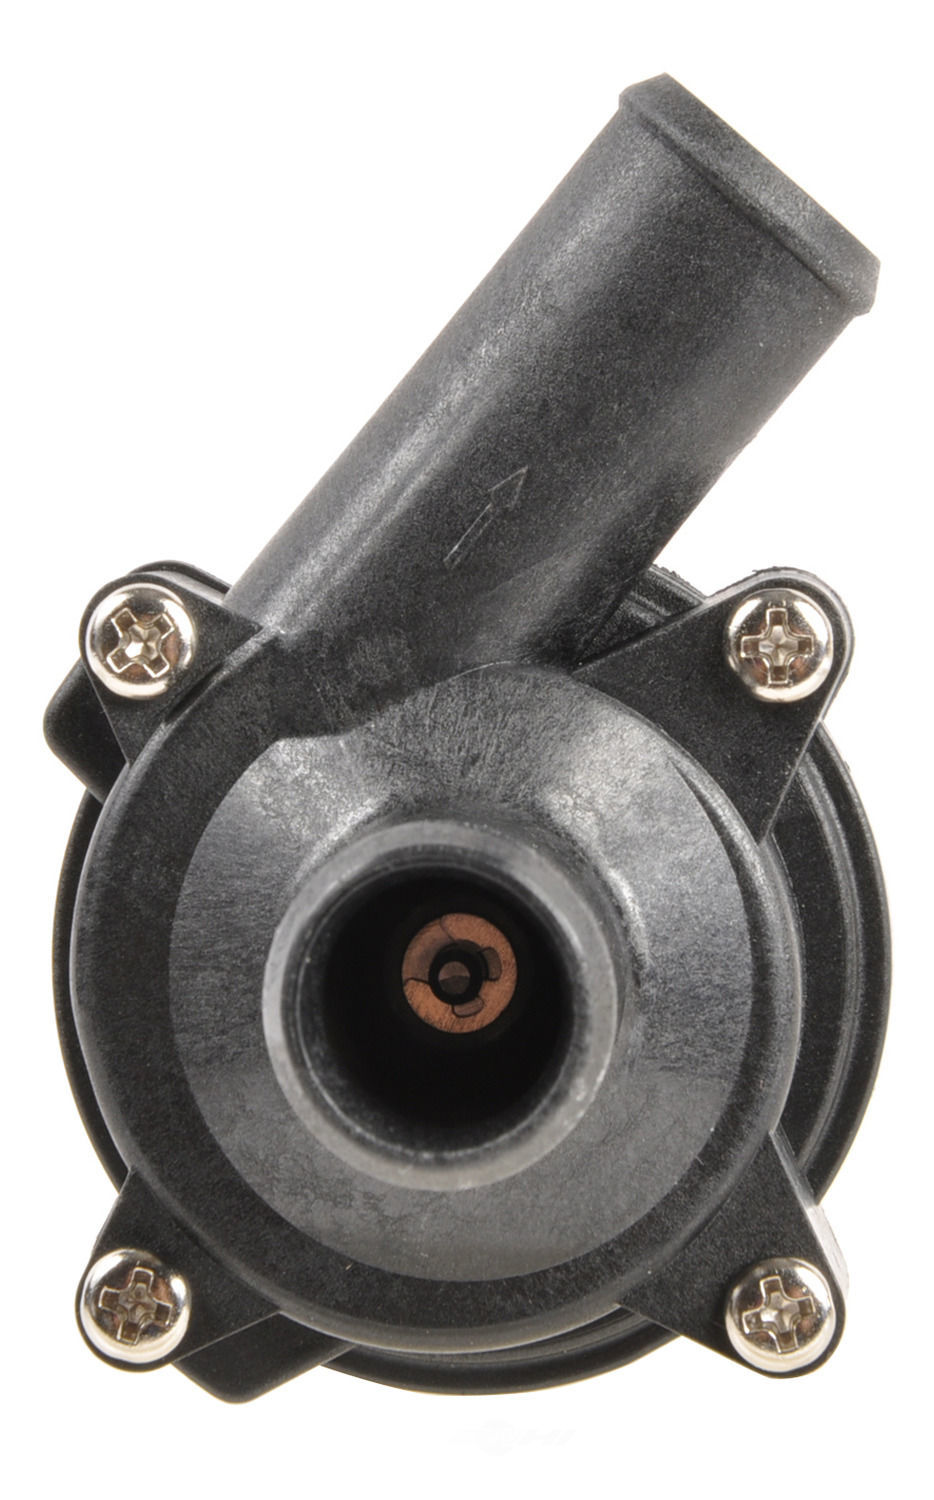 CARDONE NEW - Engine Auxiliary Water Pump - A1S 5W-3003